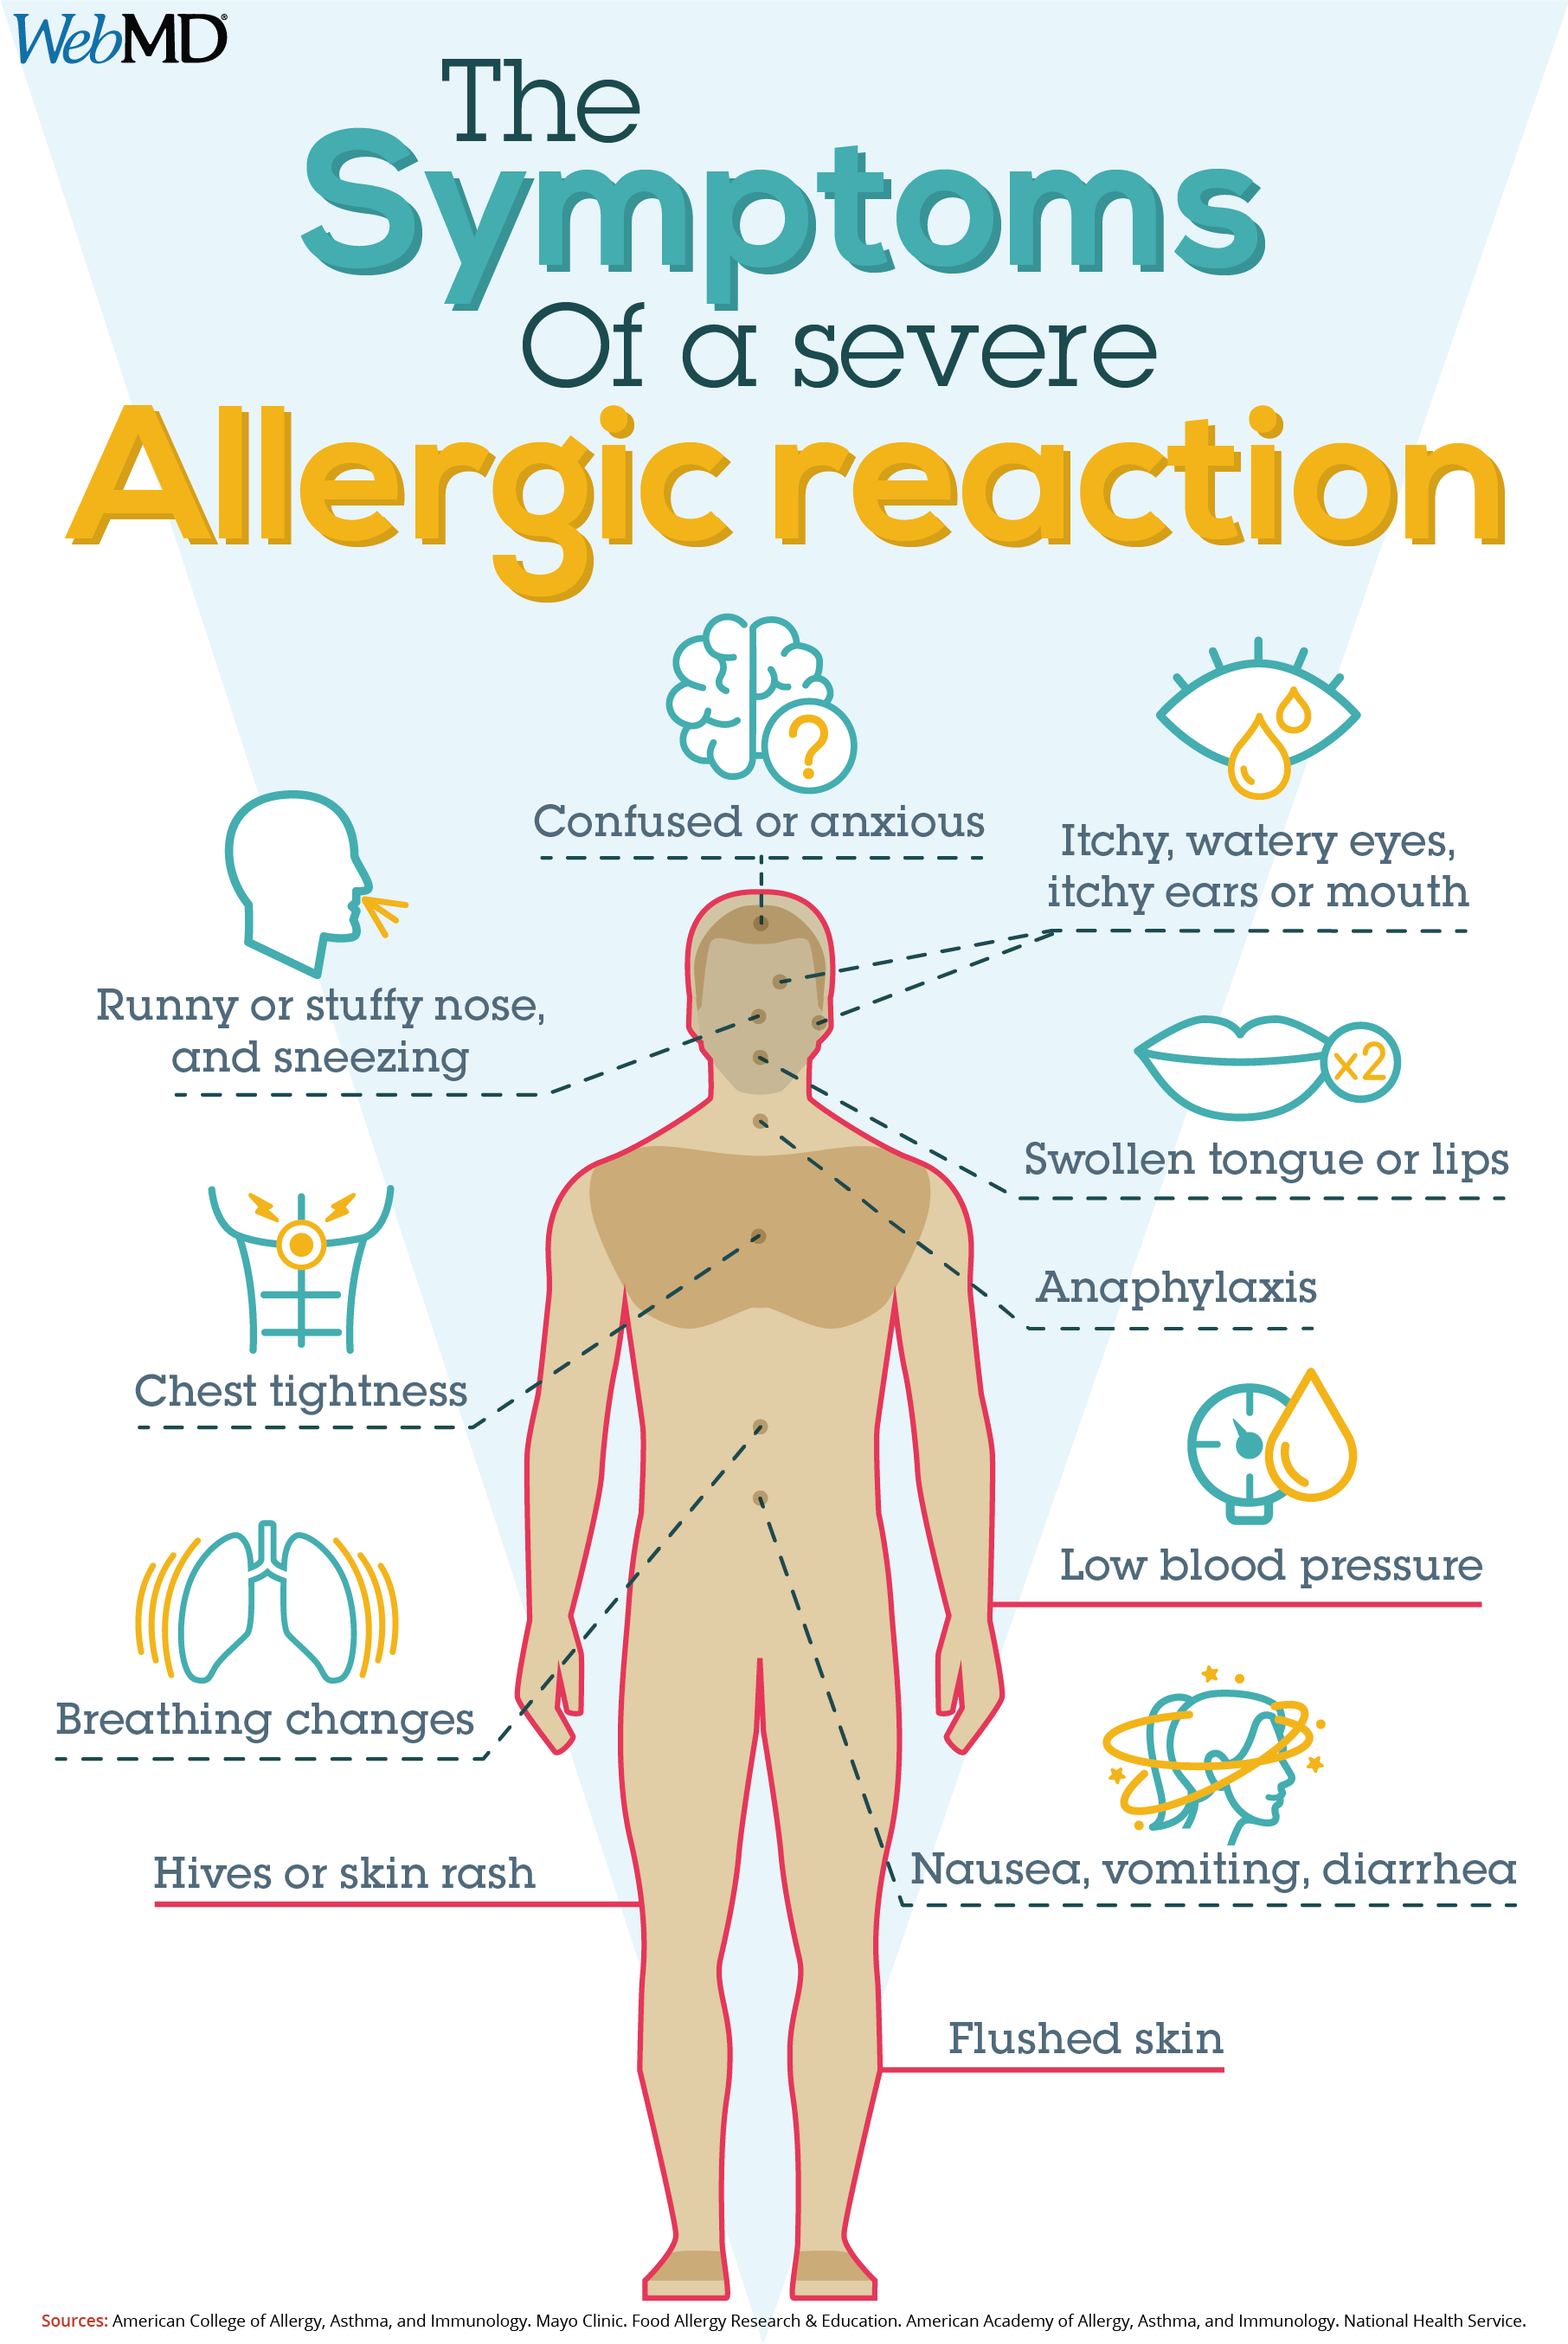 Signs of Severe Allergic Reaction